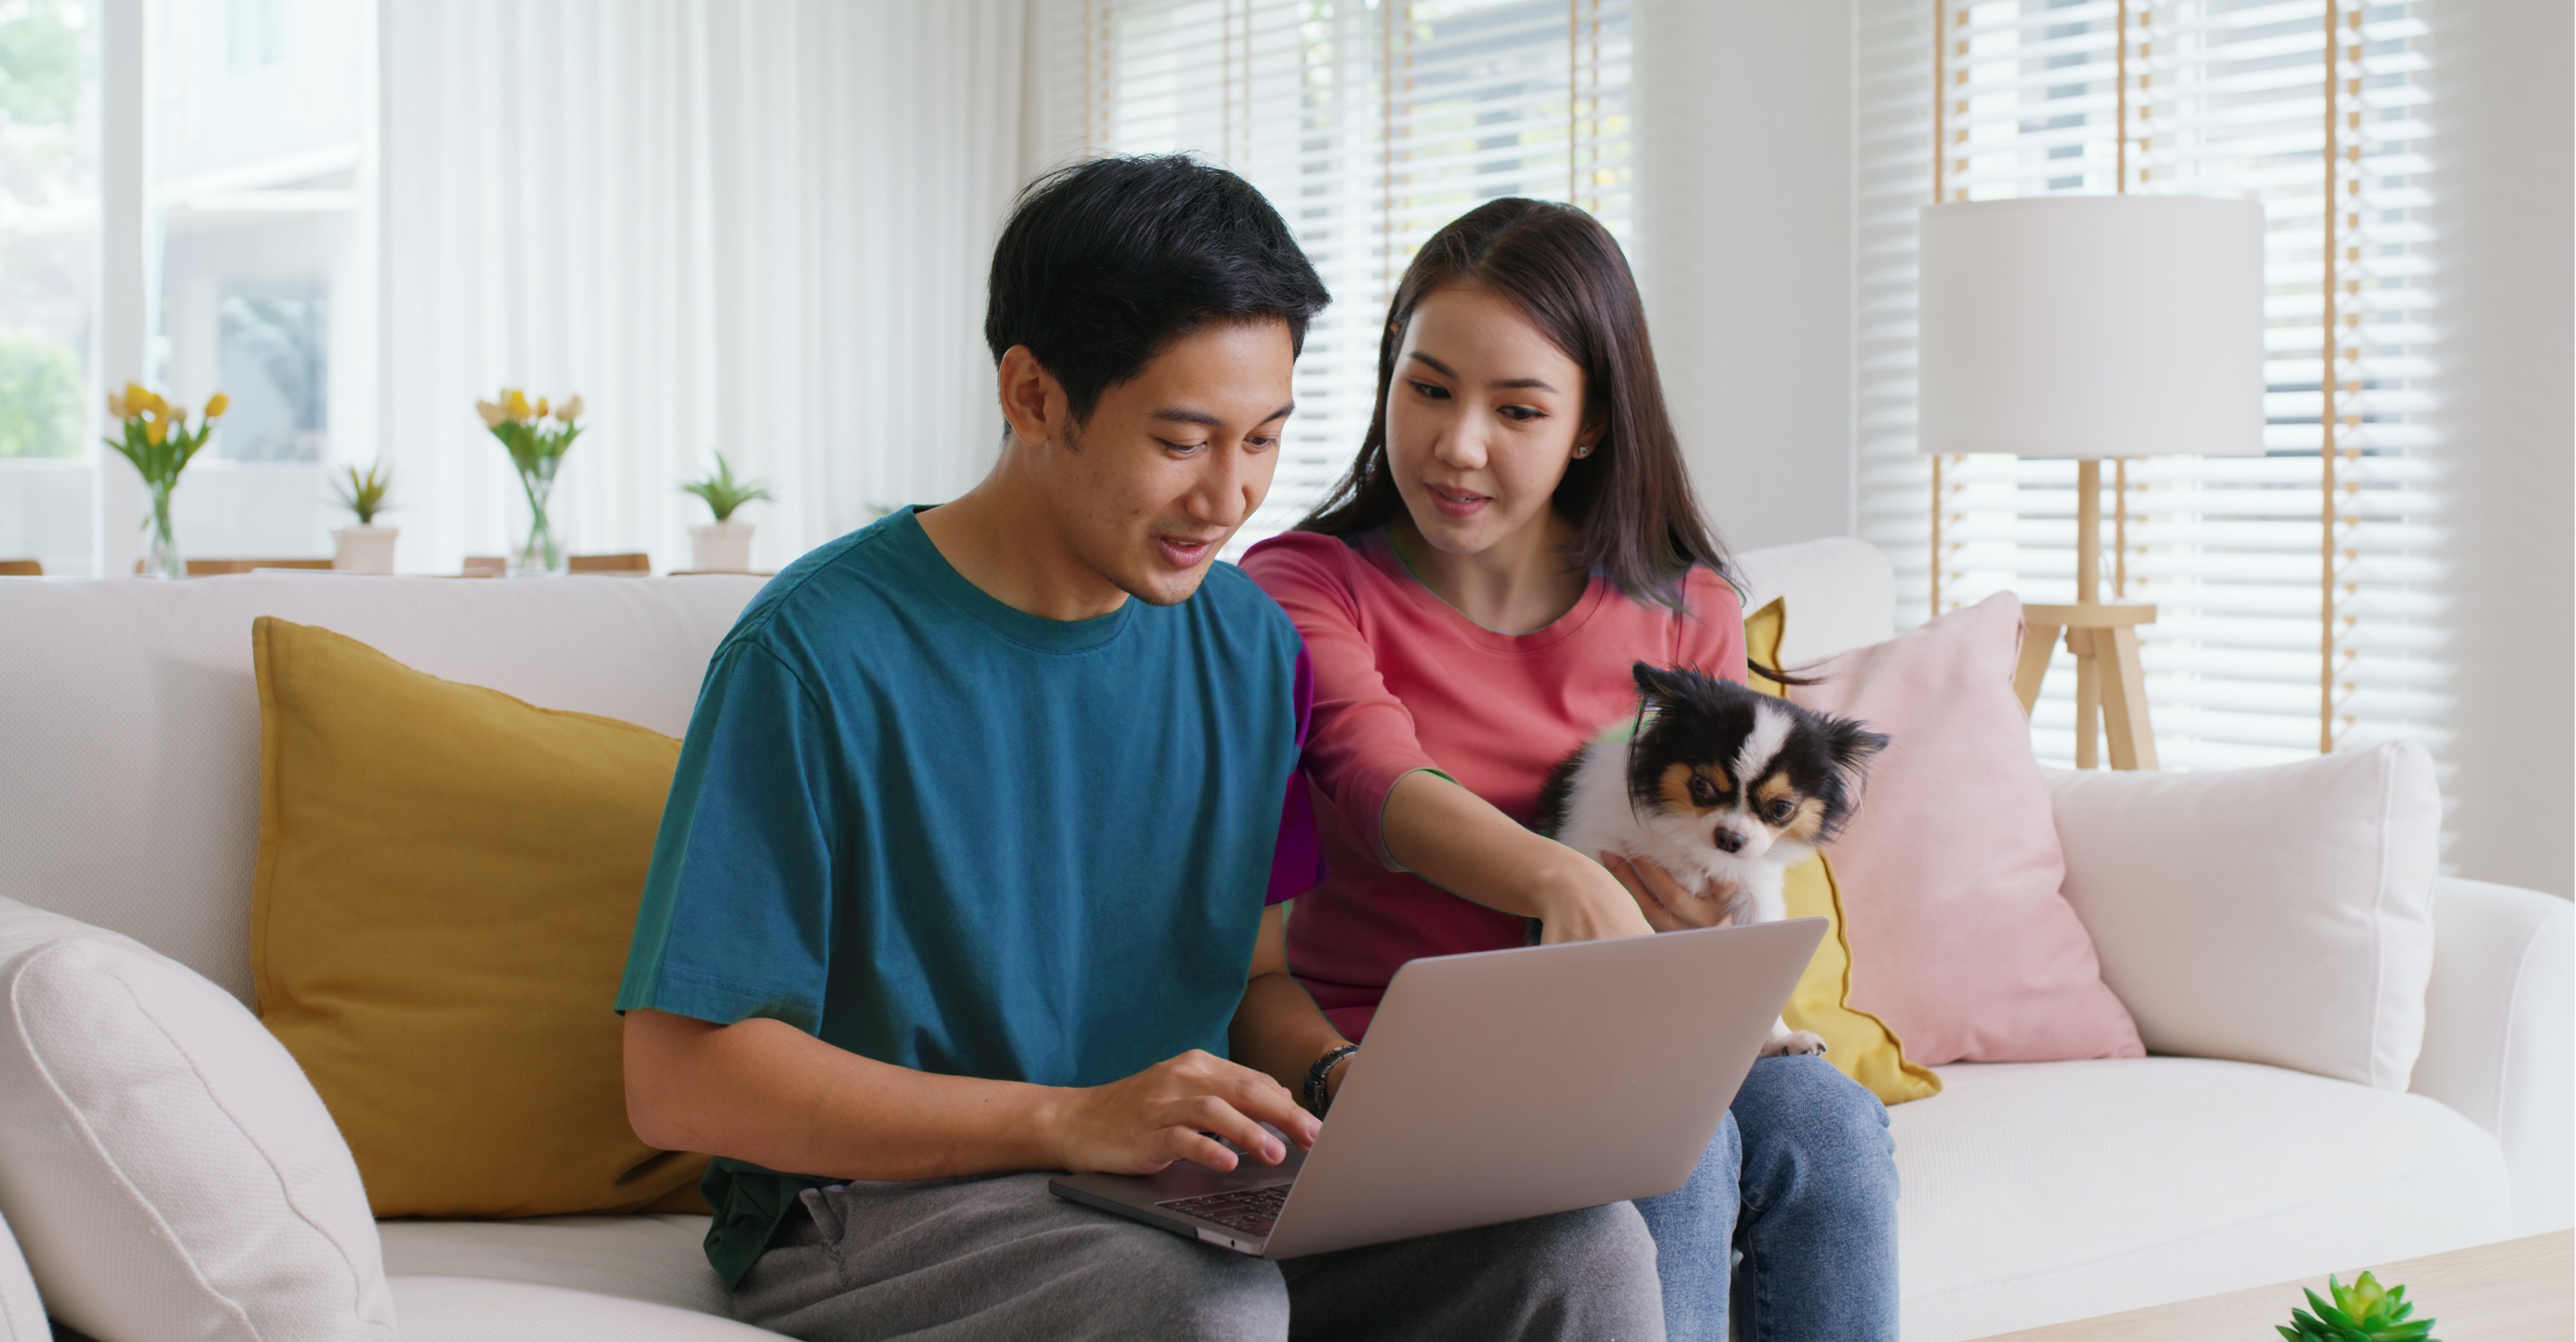 A man and a woman sit on a couch looking over a shared laptop. The woman holds a small dog in her lap.